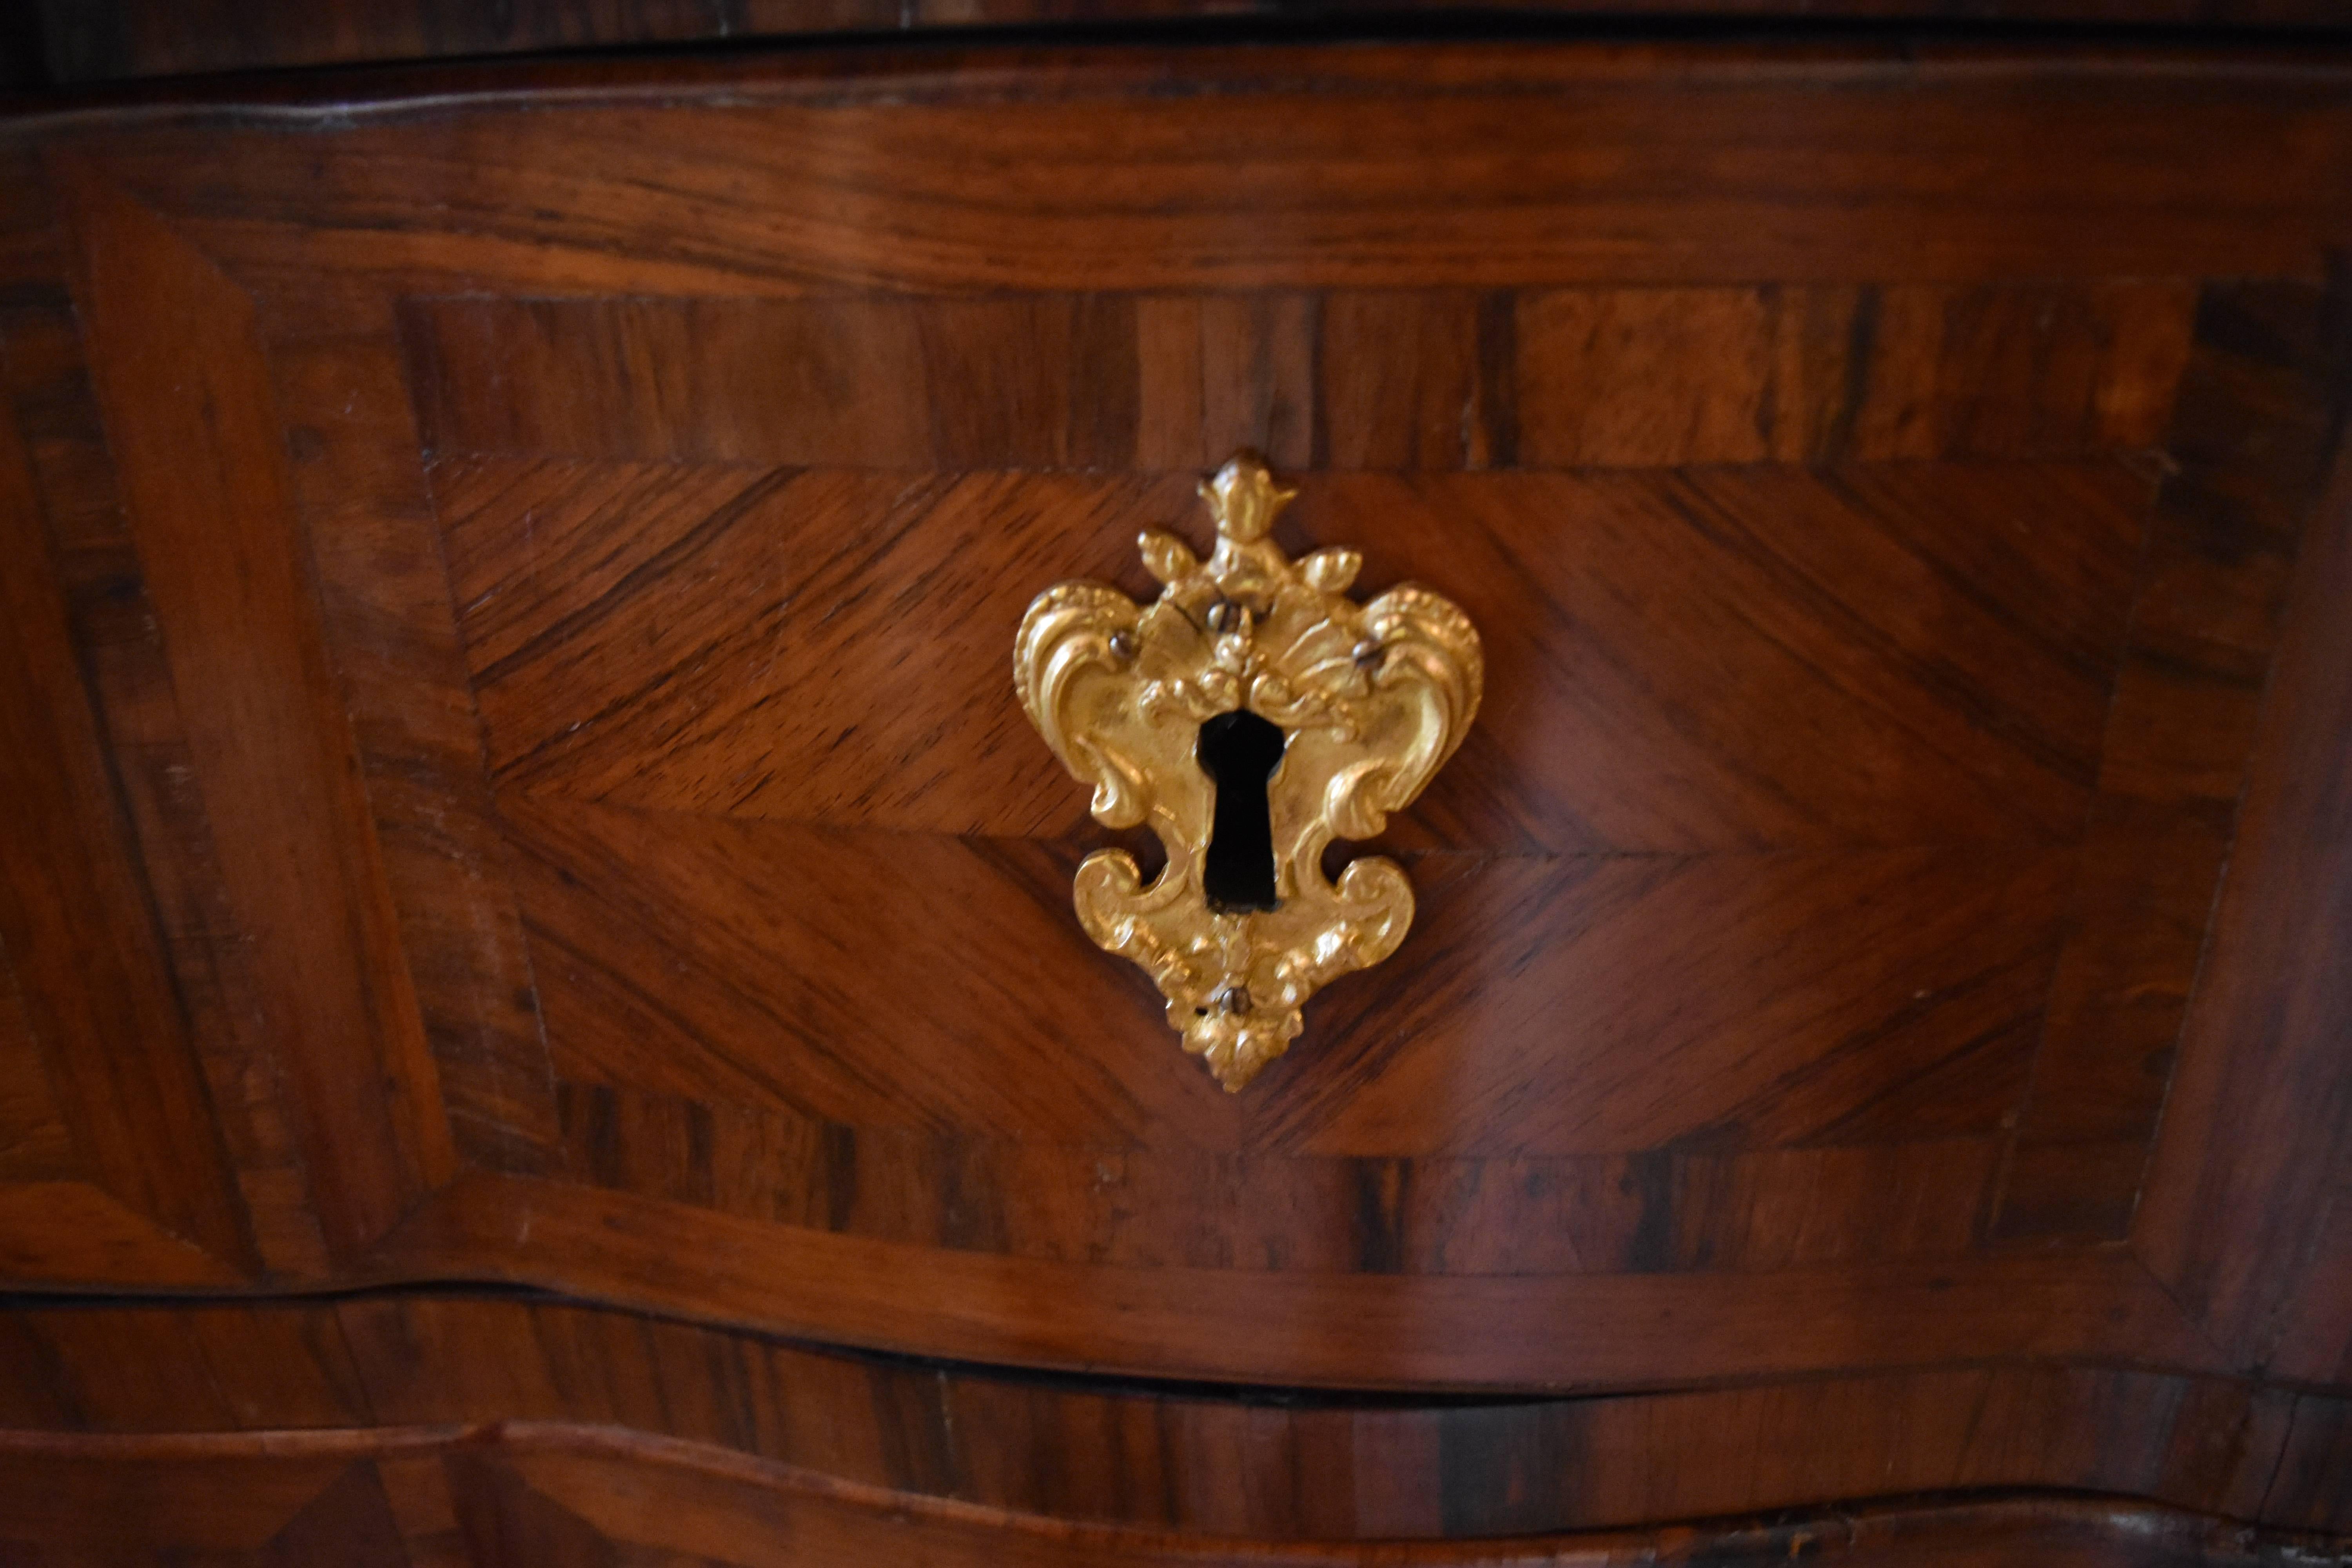 This 18th century commode was purchased from an antique store across the street from the Louvre in Paris. It features exceptional parquetry on all sides with additional parquetry on the drawer tops that can only be viewed when the drawers are open.